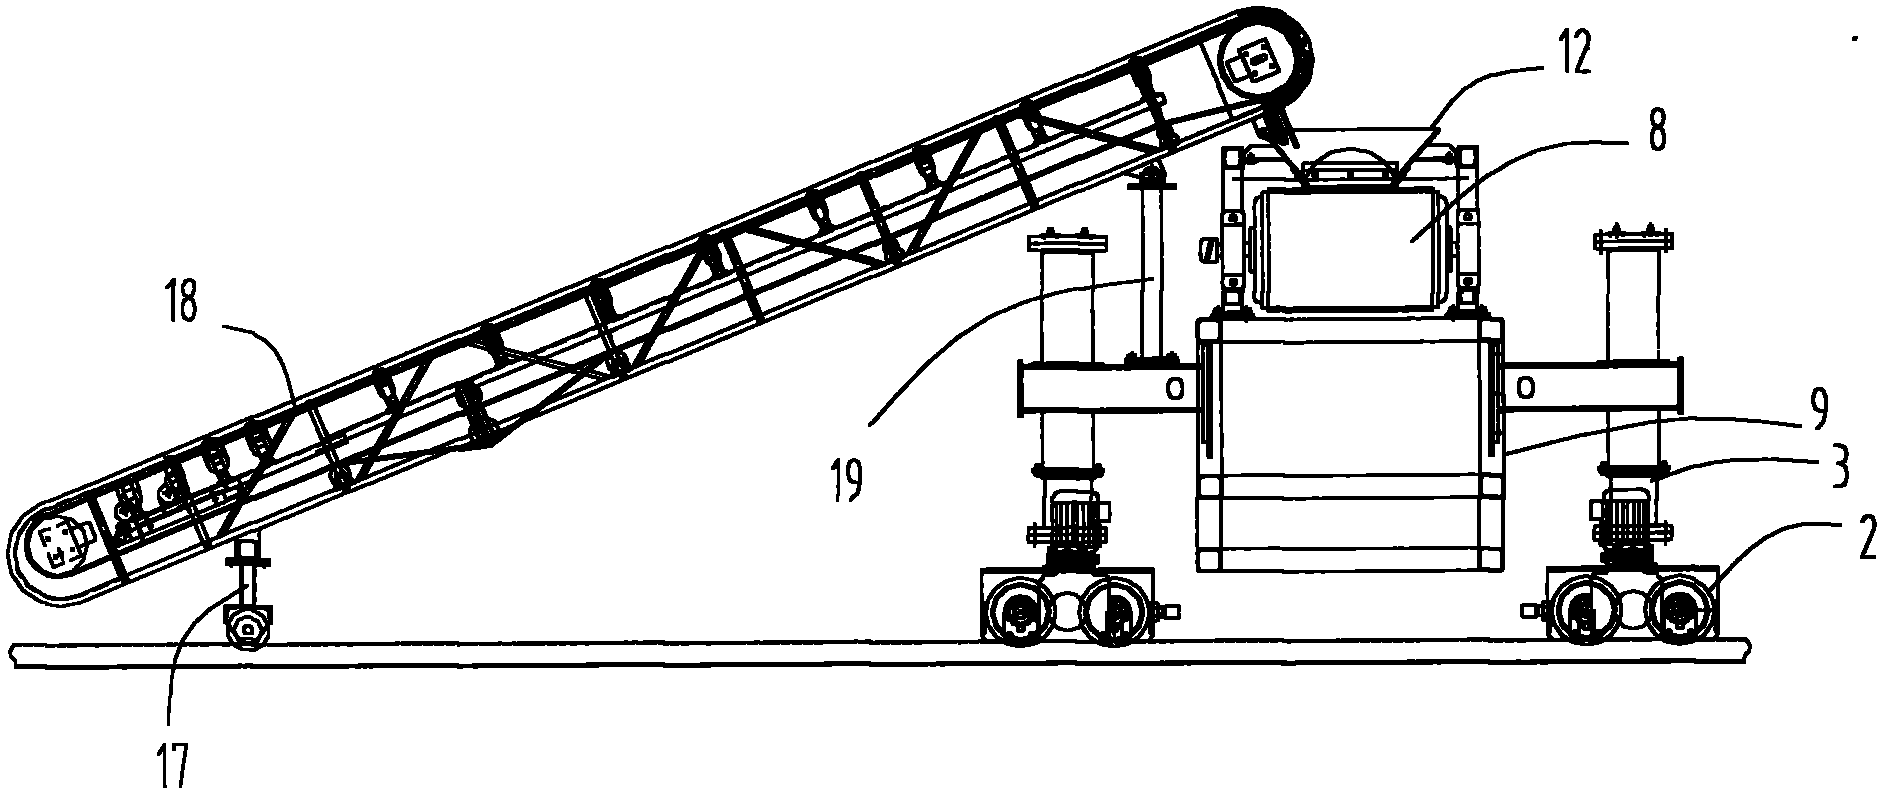 Full-section multi-functional canal concrete lining machine